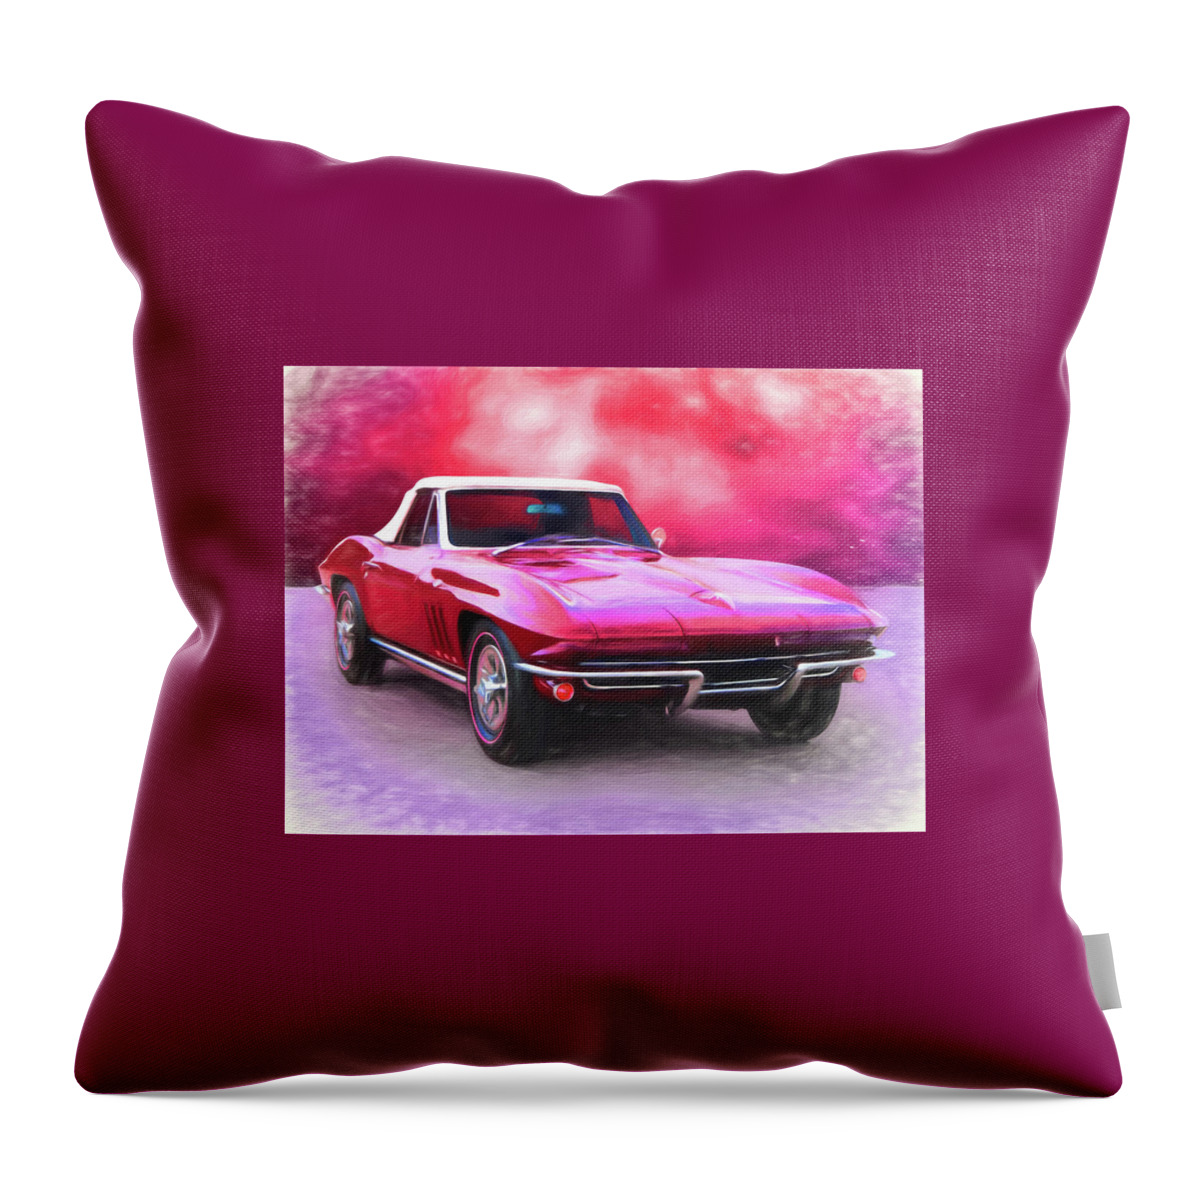 1965 Corvette Throw Pillow featuring the digital art 1965 Red Vette by Rick Wicker